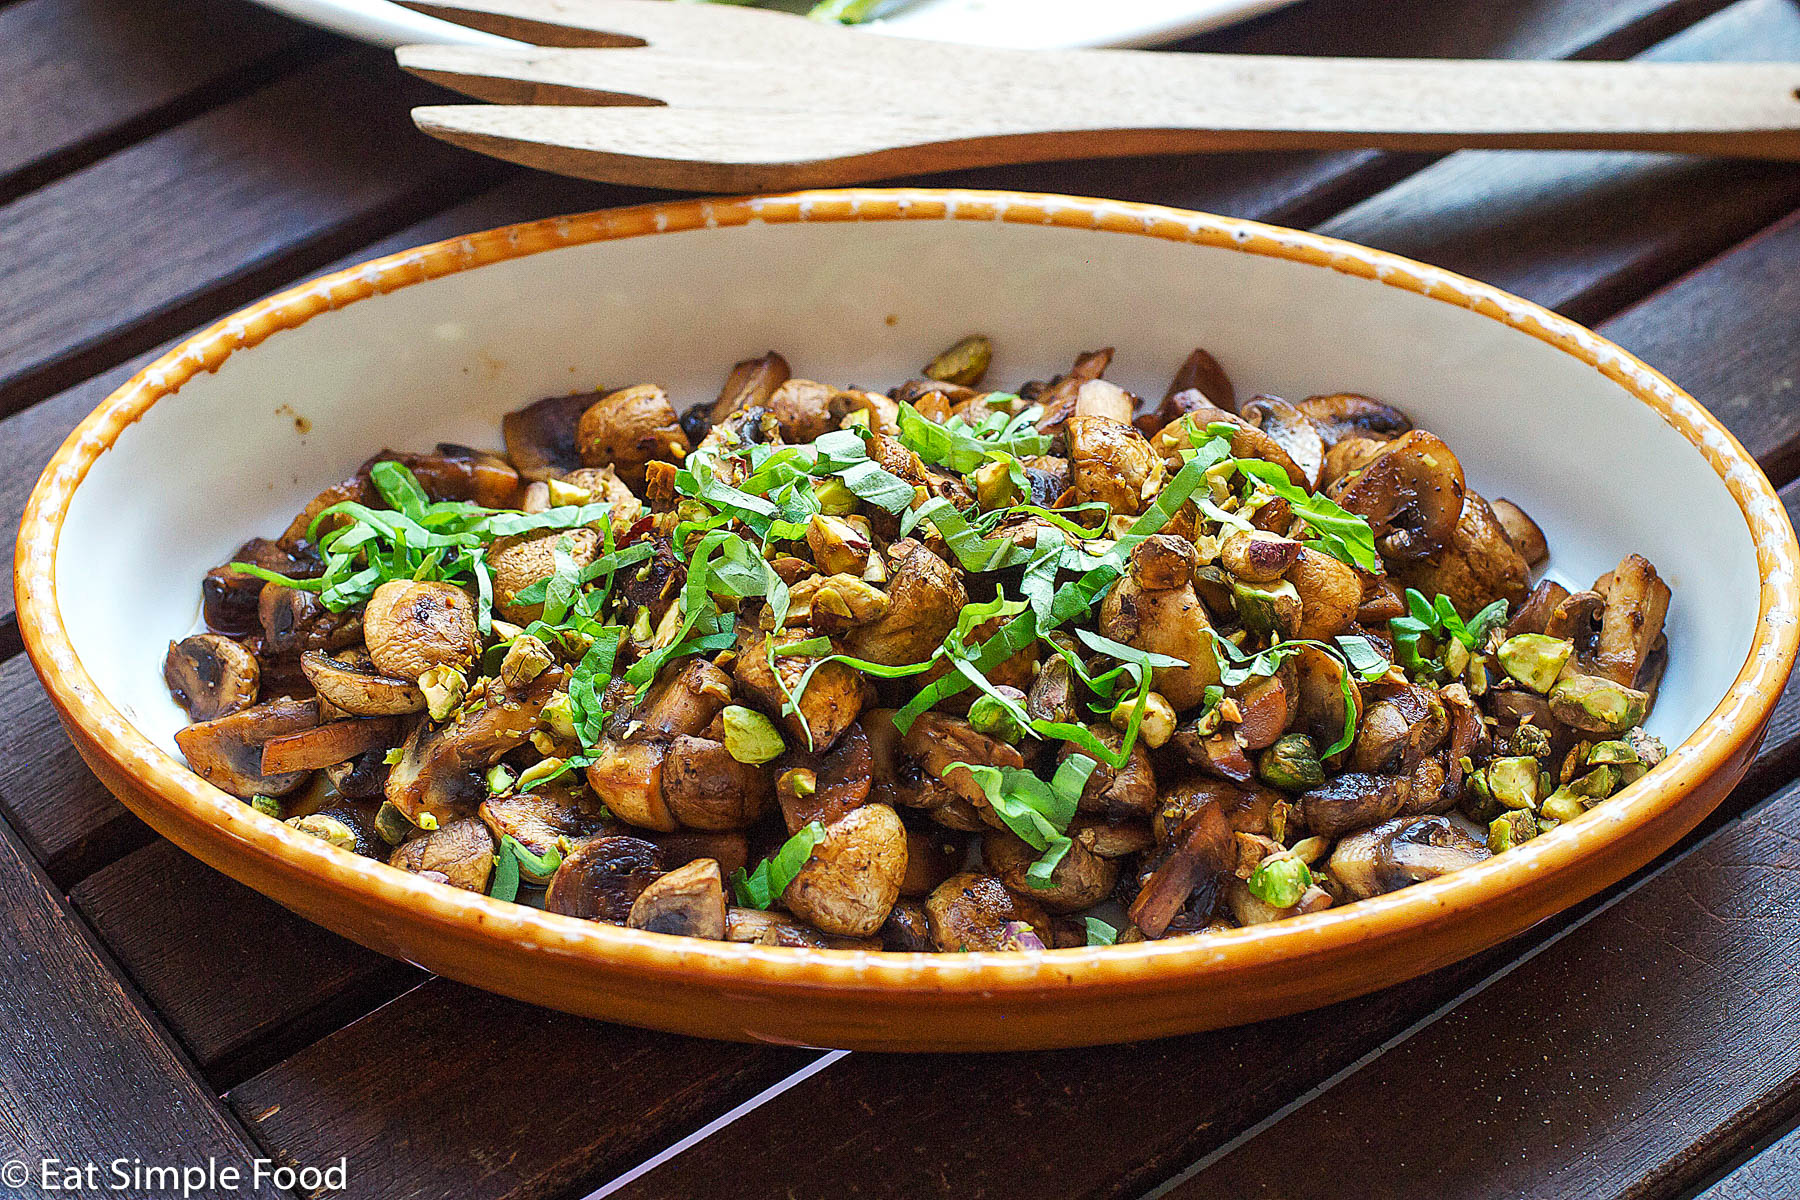 Cooked browned quartered mushrooms garnished with sliced basils and pistachios in a yellow baking dish.